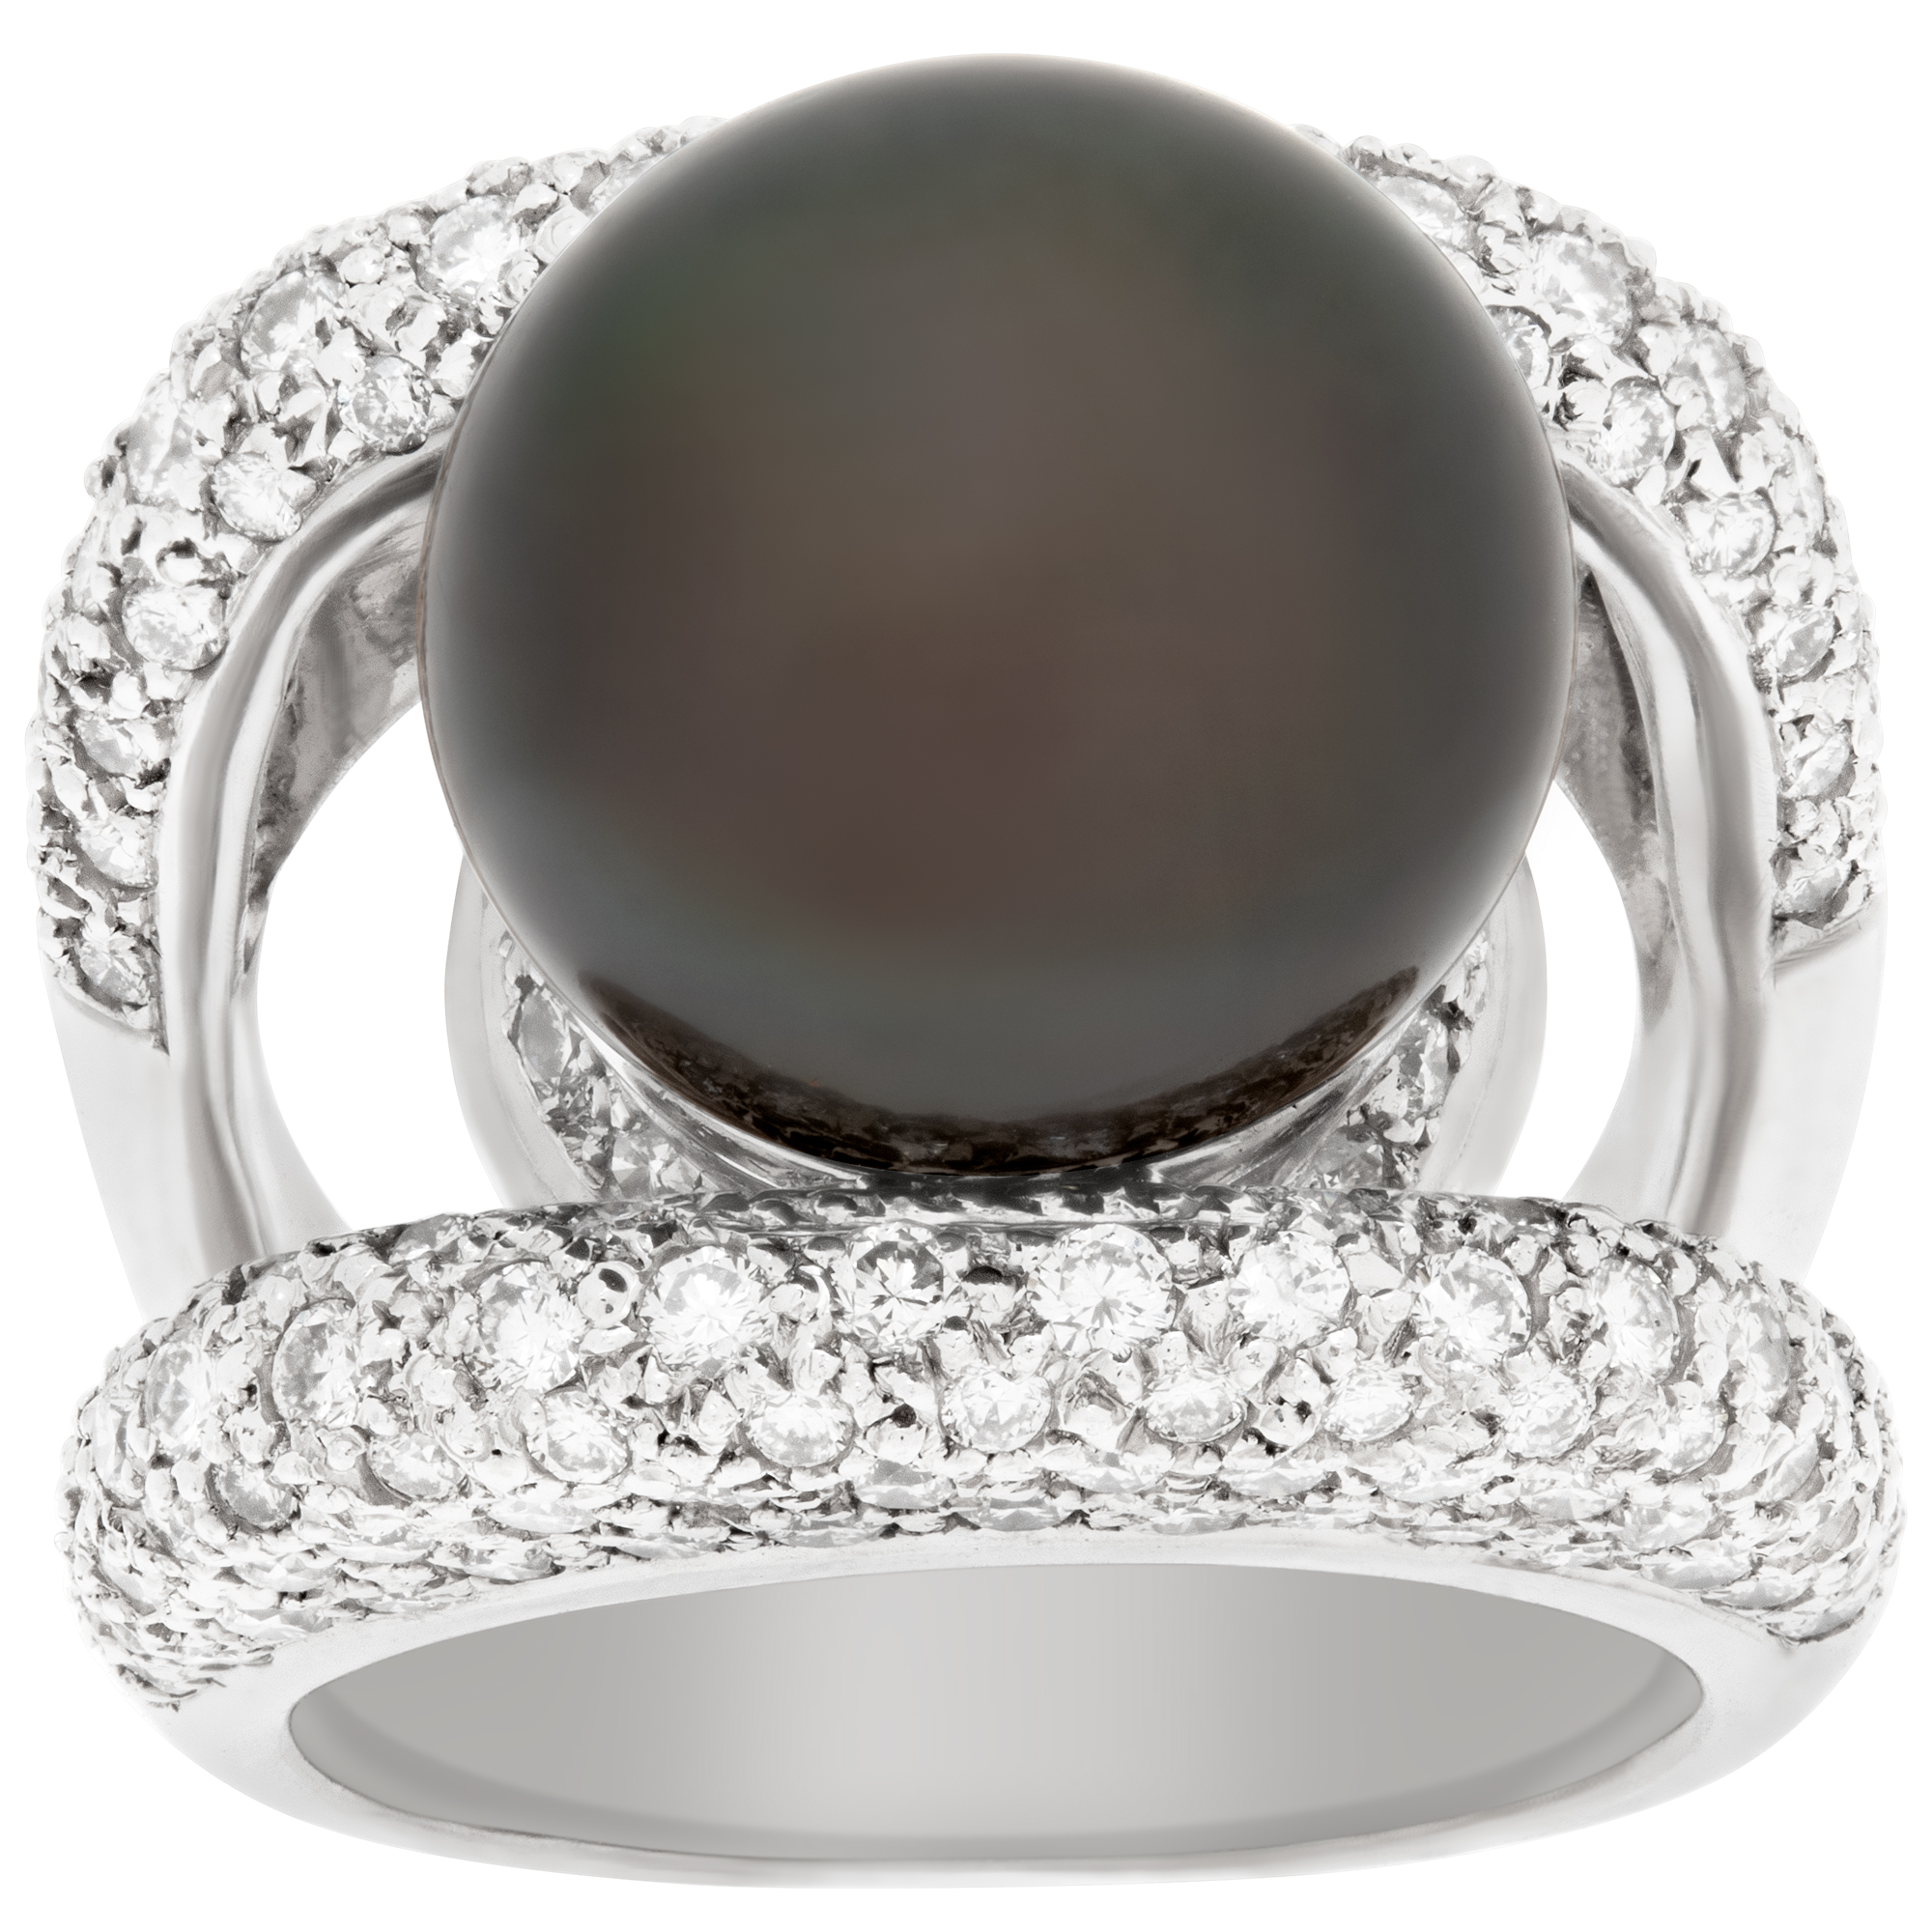 Tahitian pearl (15 x15.5mm) and 3.00 carats diamonds ring in 18k white gold